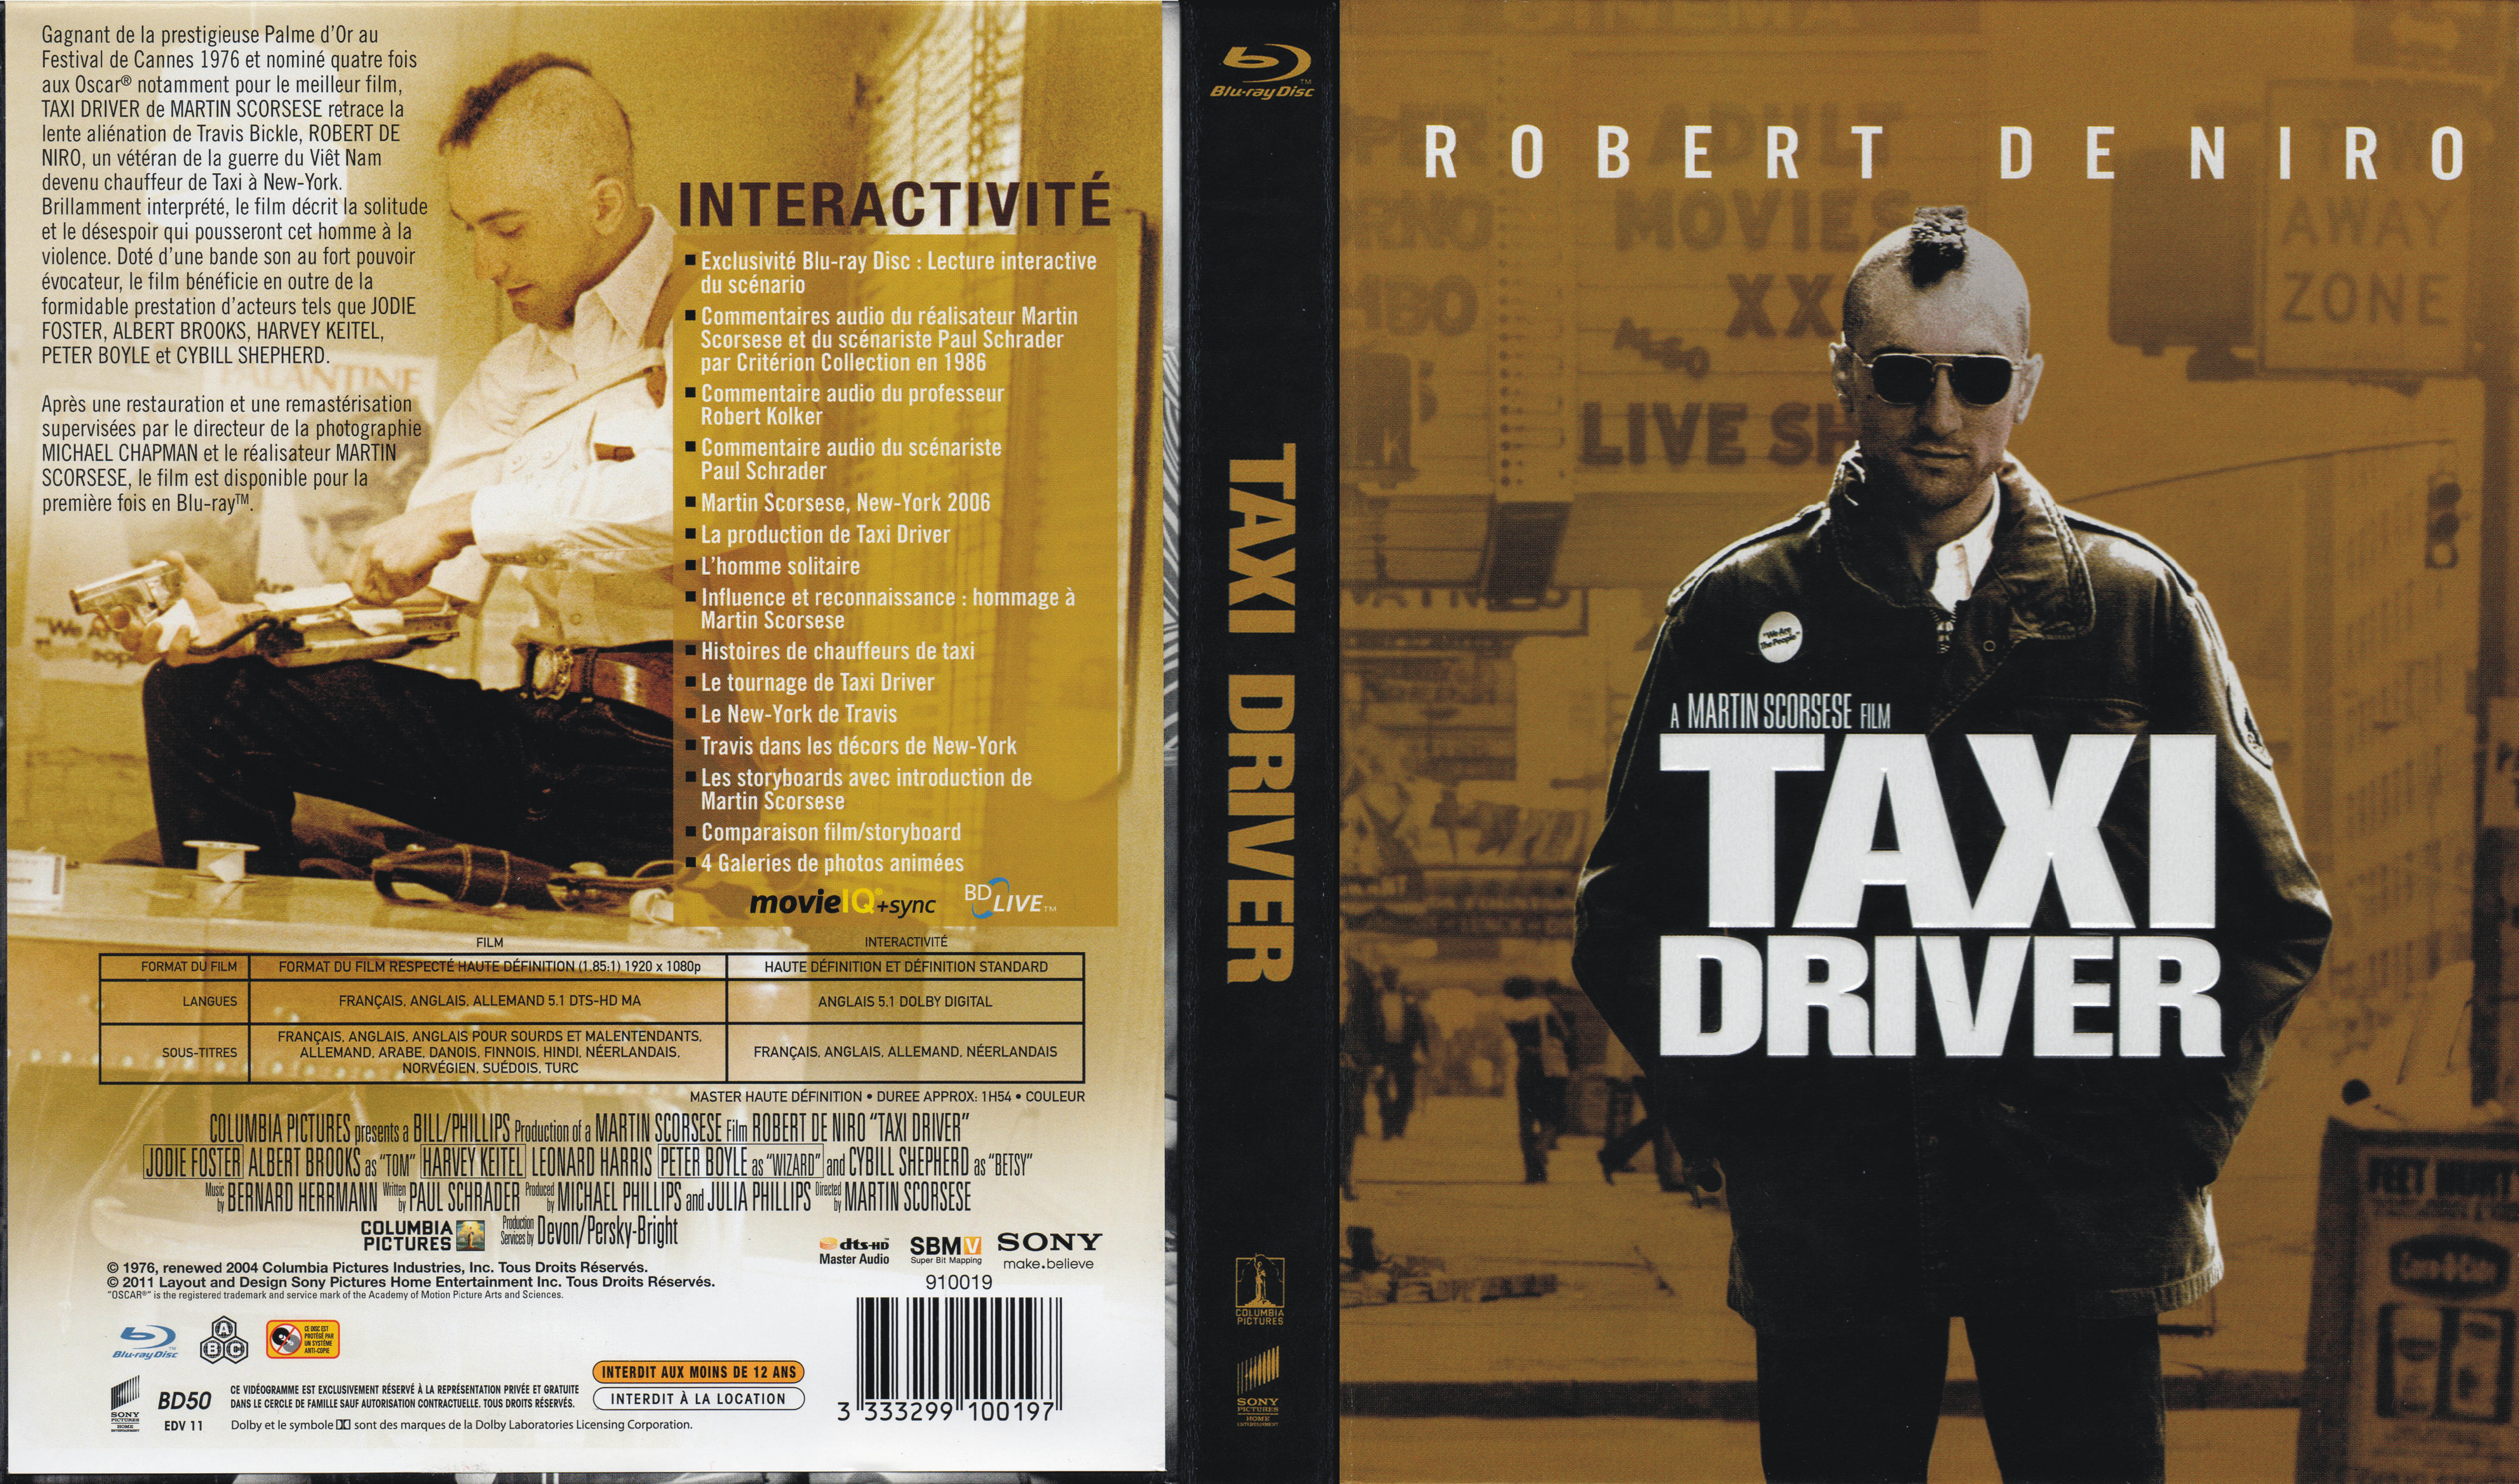 Jaquette DVD Taxi driver (BLU-RAY) v2